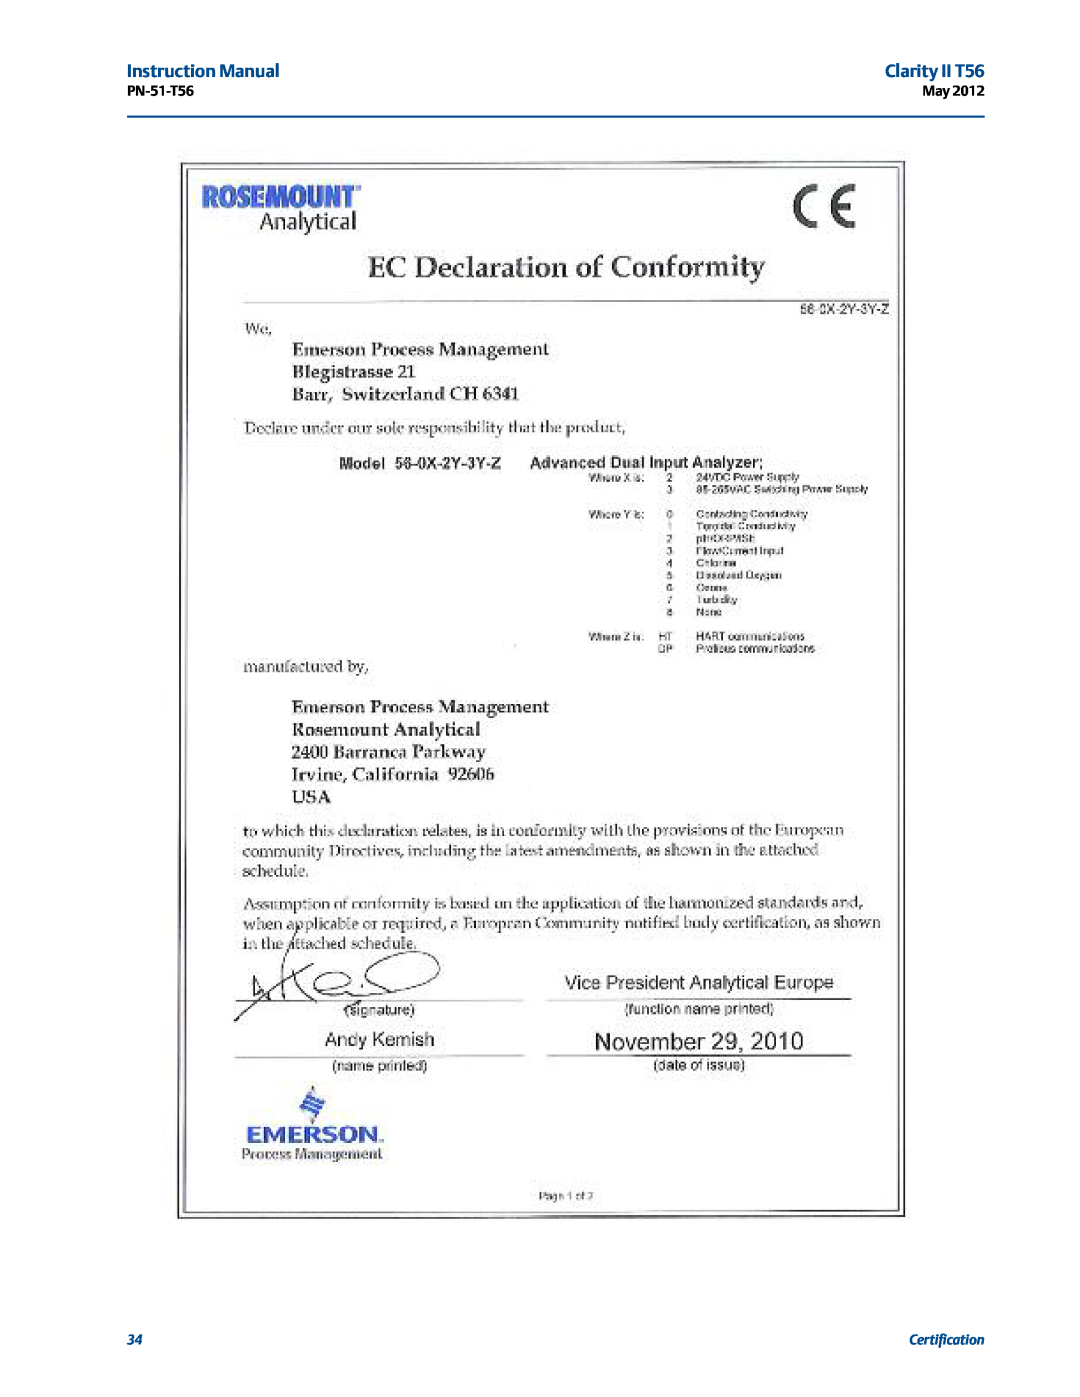 Emerson PN-51-T56 instruction manual Clarity II T56, Certification 